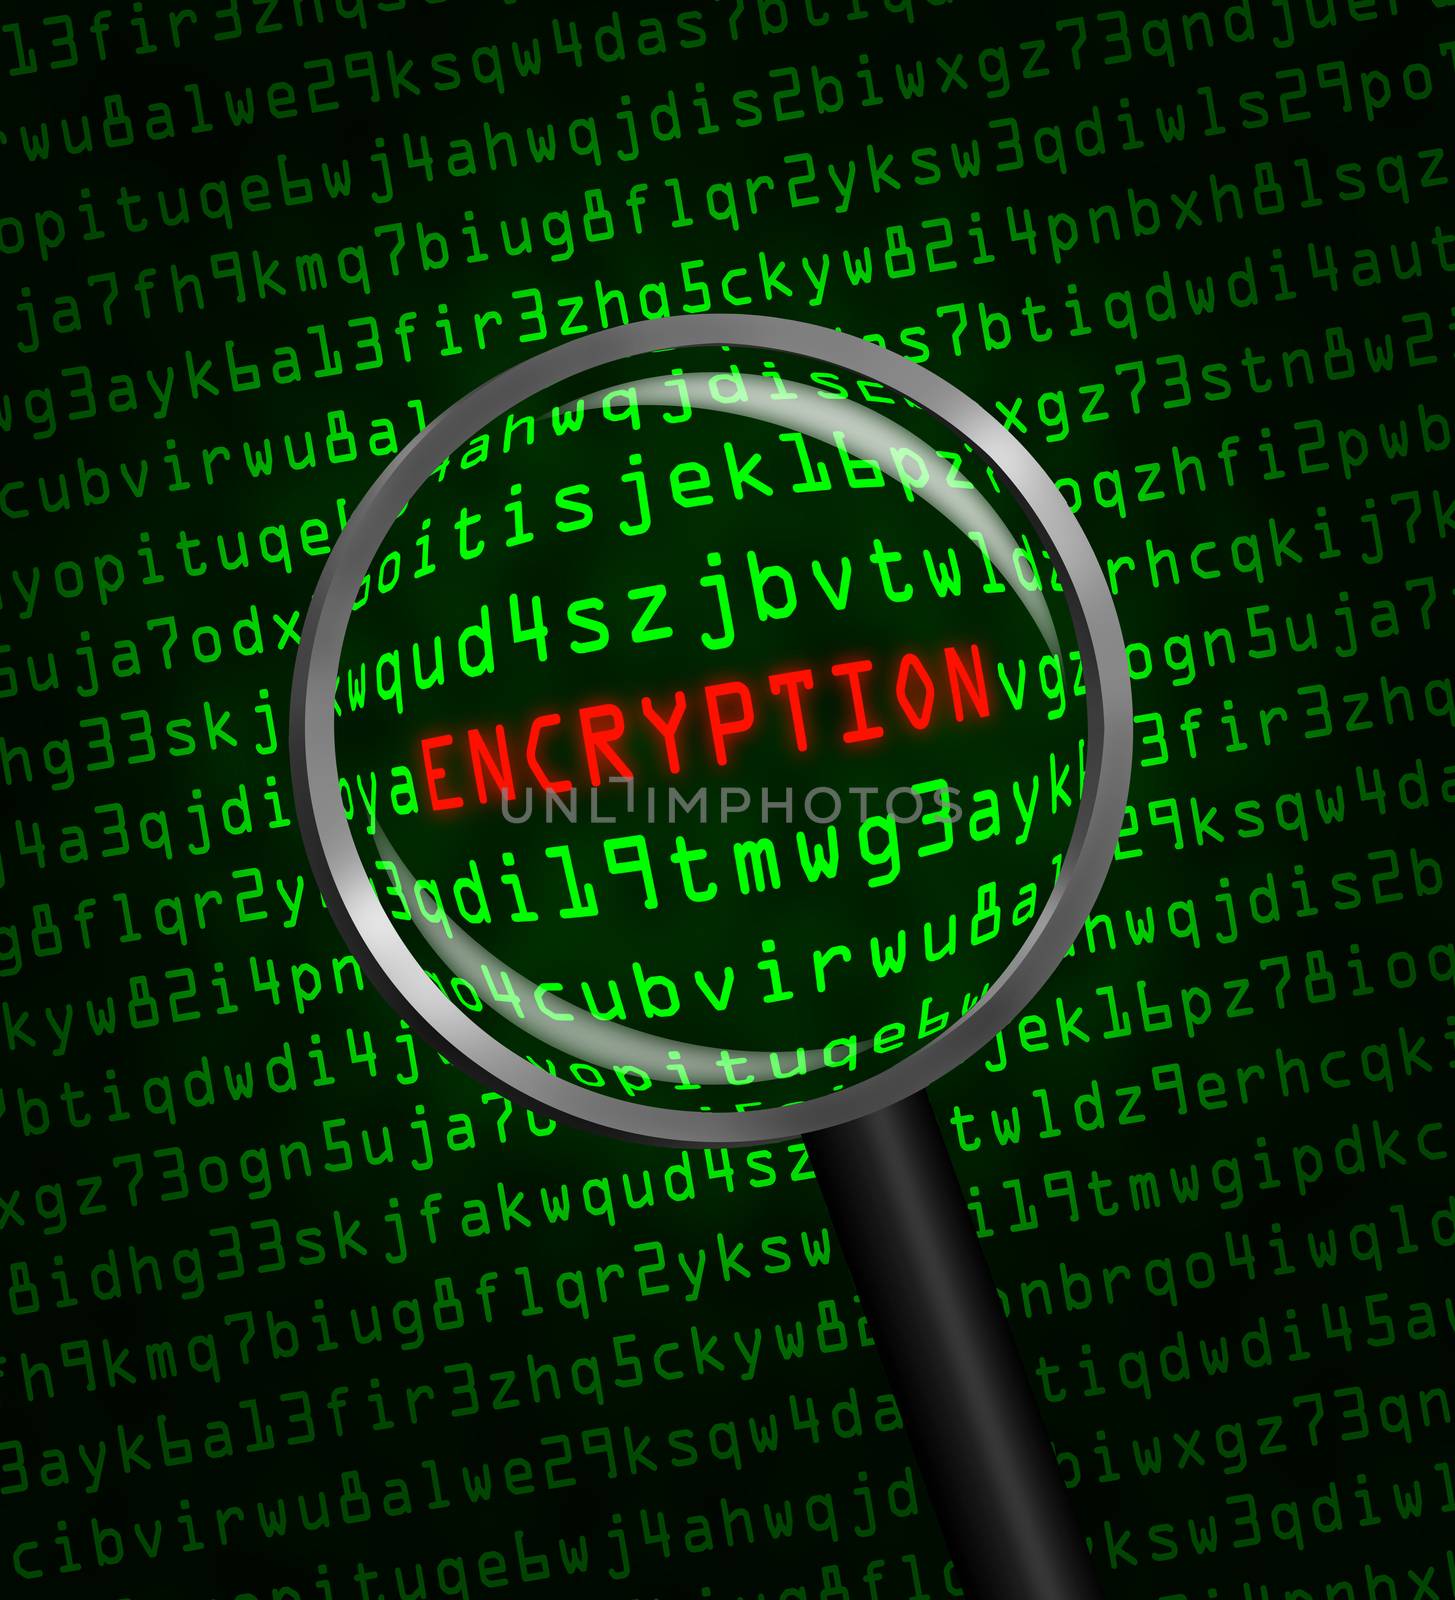 The word "ENCRYPTION" in red revealed in green computer machine code through a magnifying glass 